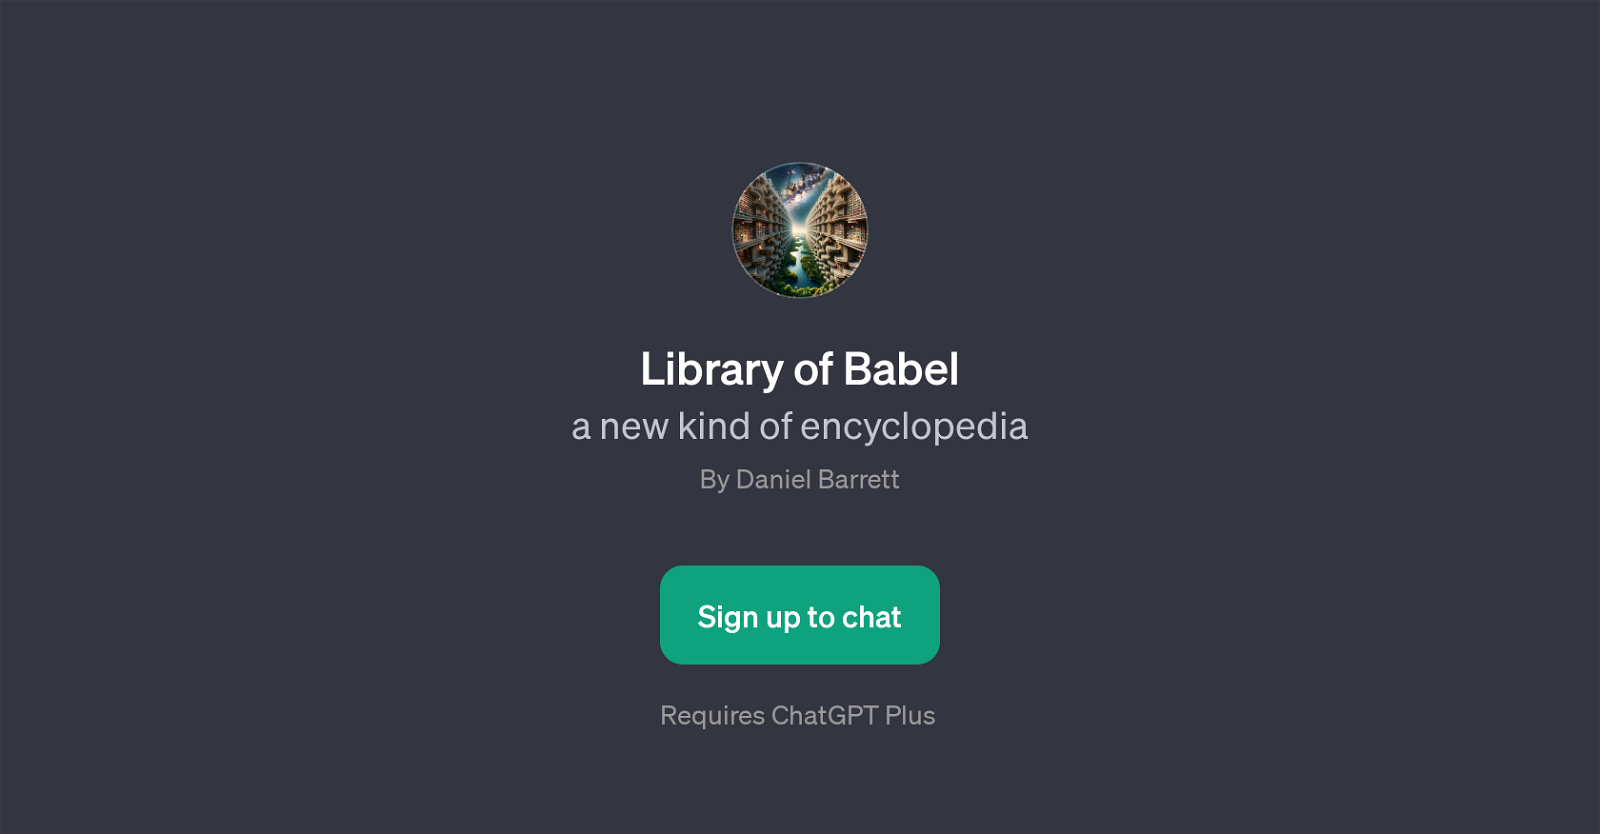 Library of Babel website